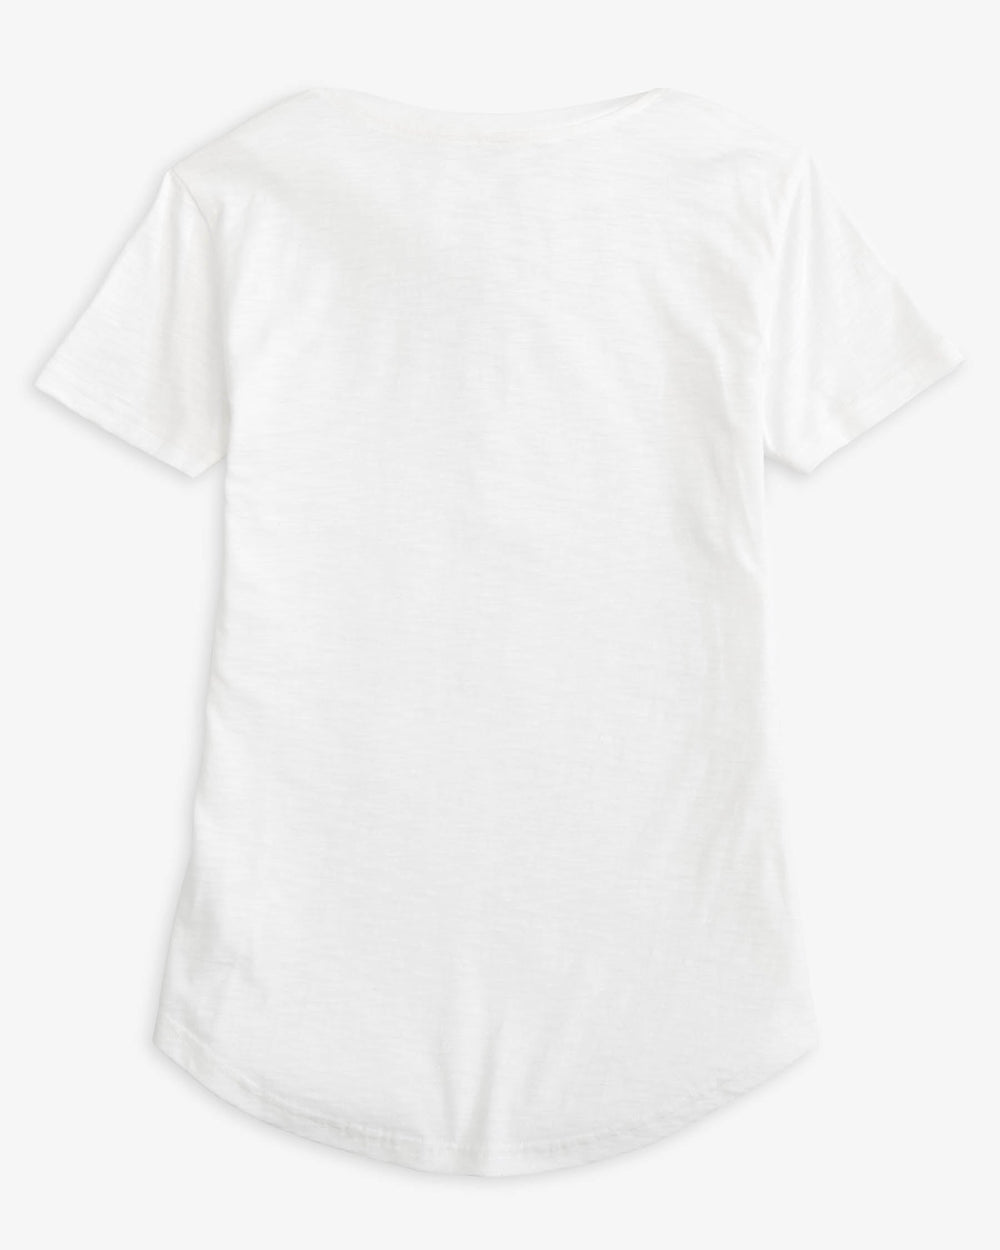 The back view of the Audrey Sun Farer Short Sleeve T-shirt by Southern Tide - Classic White